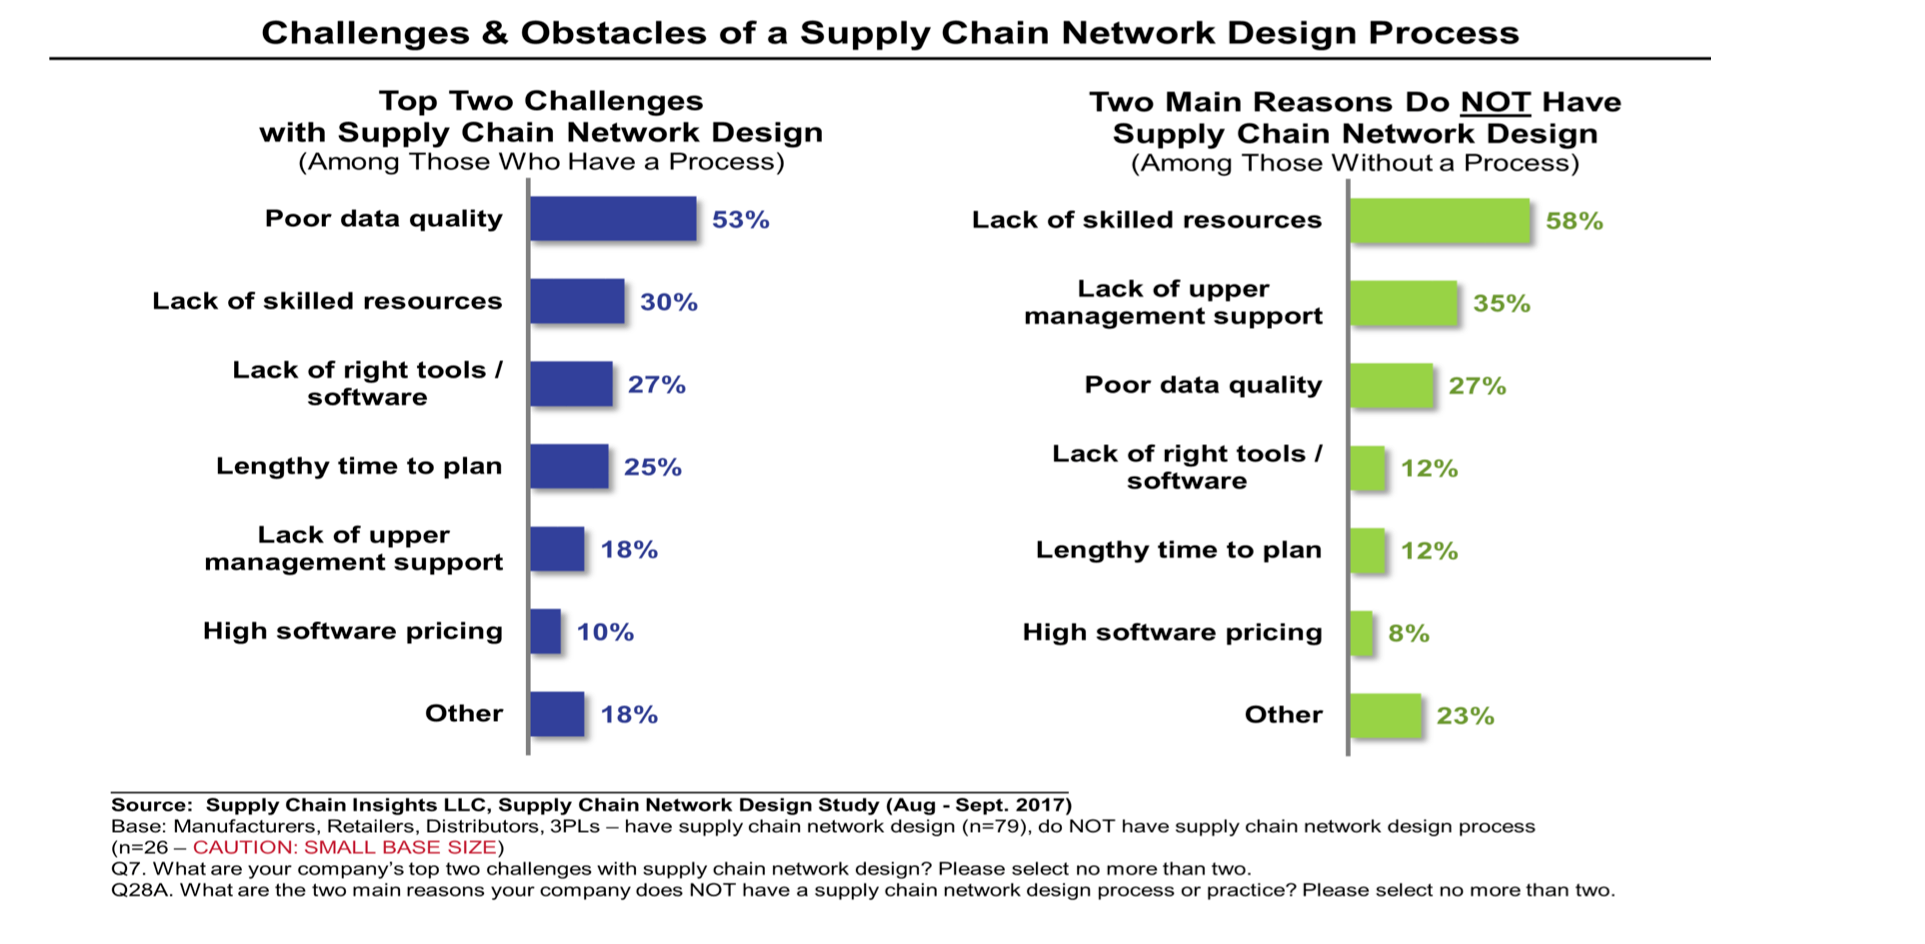 supply chain data quality is a top challenge